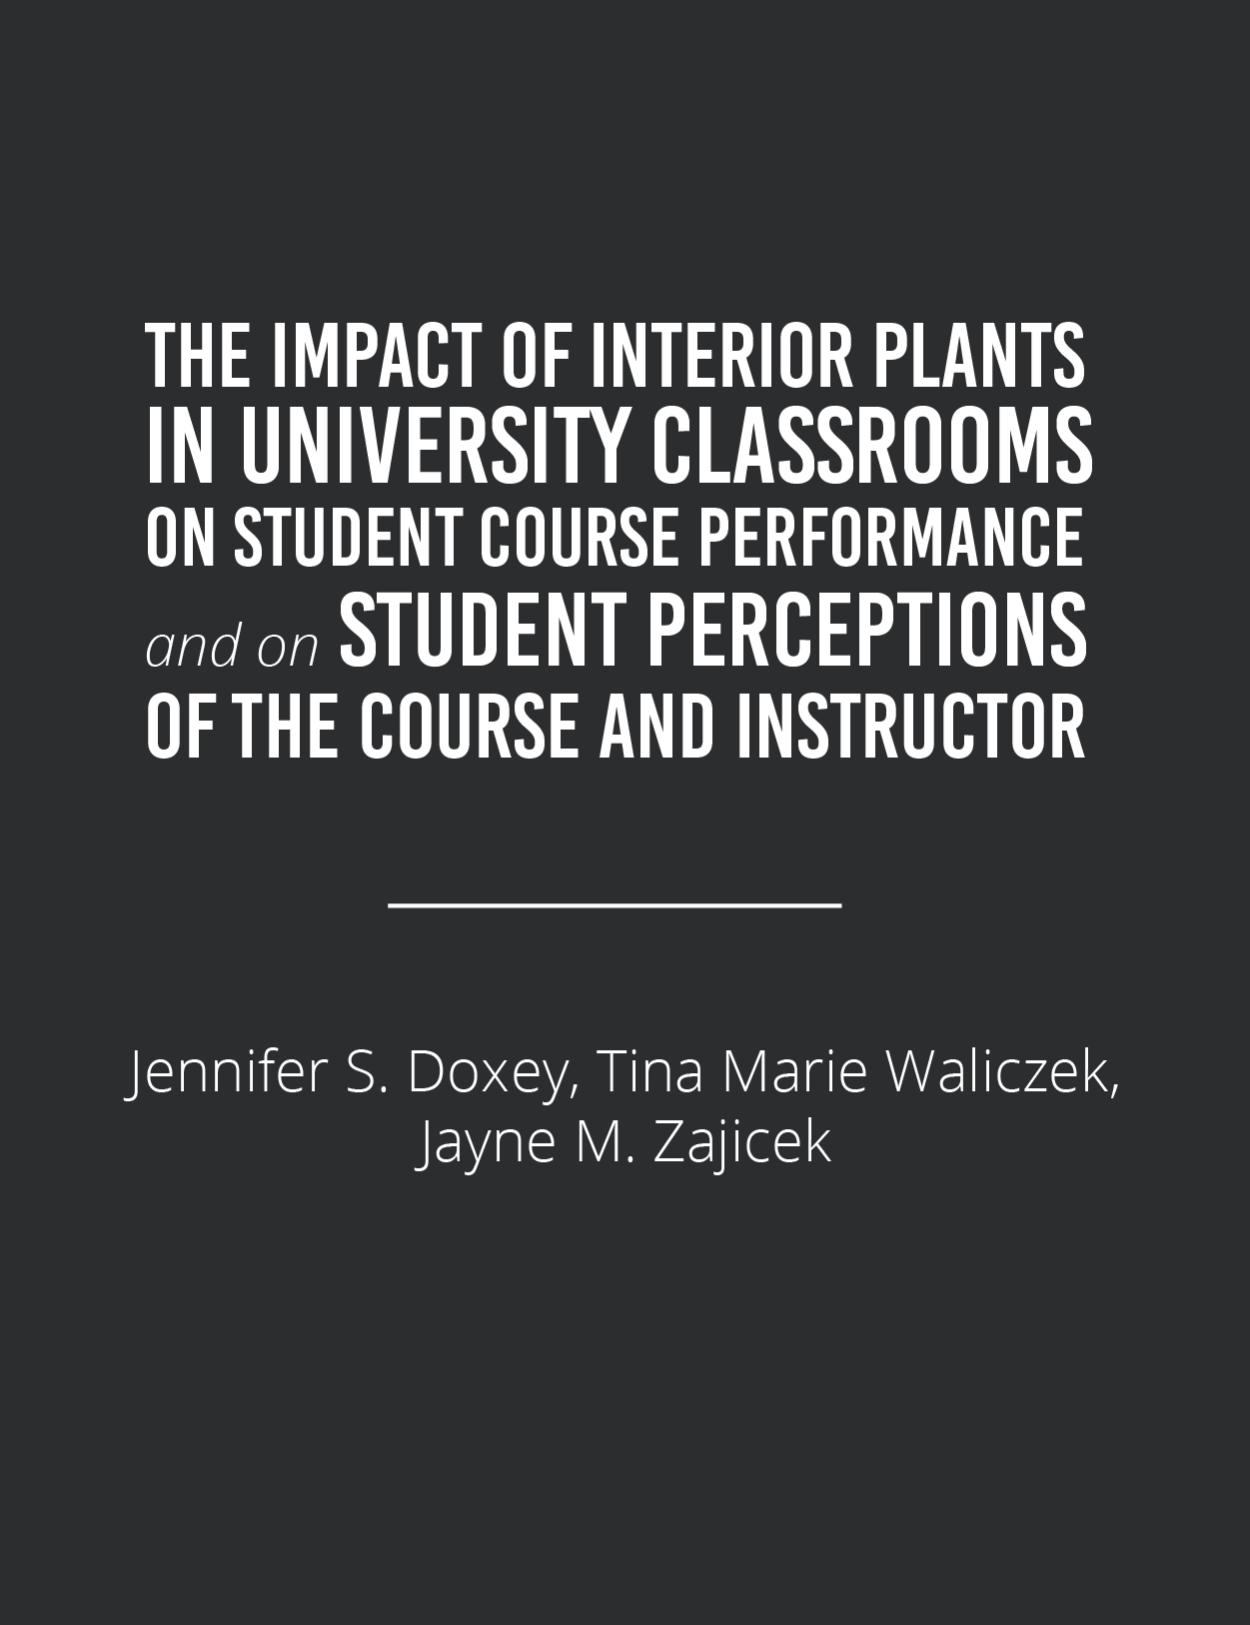 interior plants and student course performance